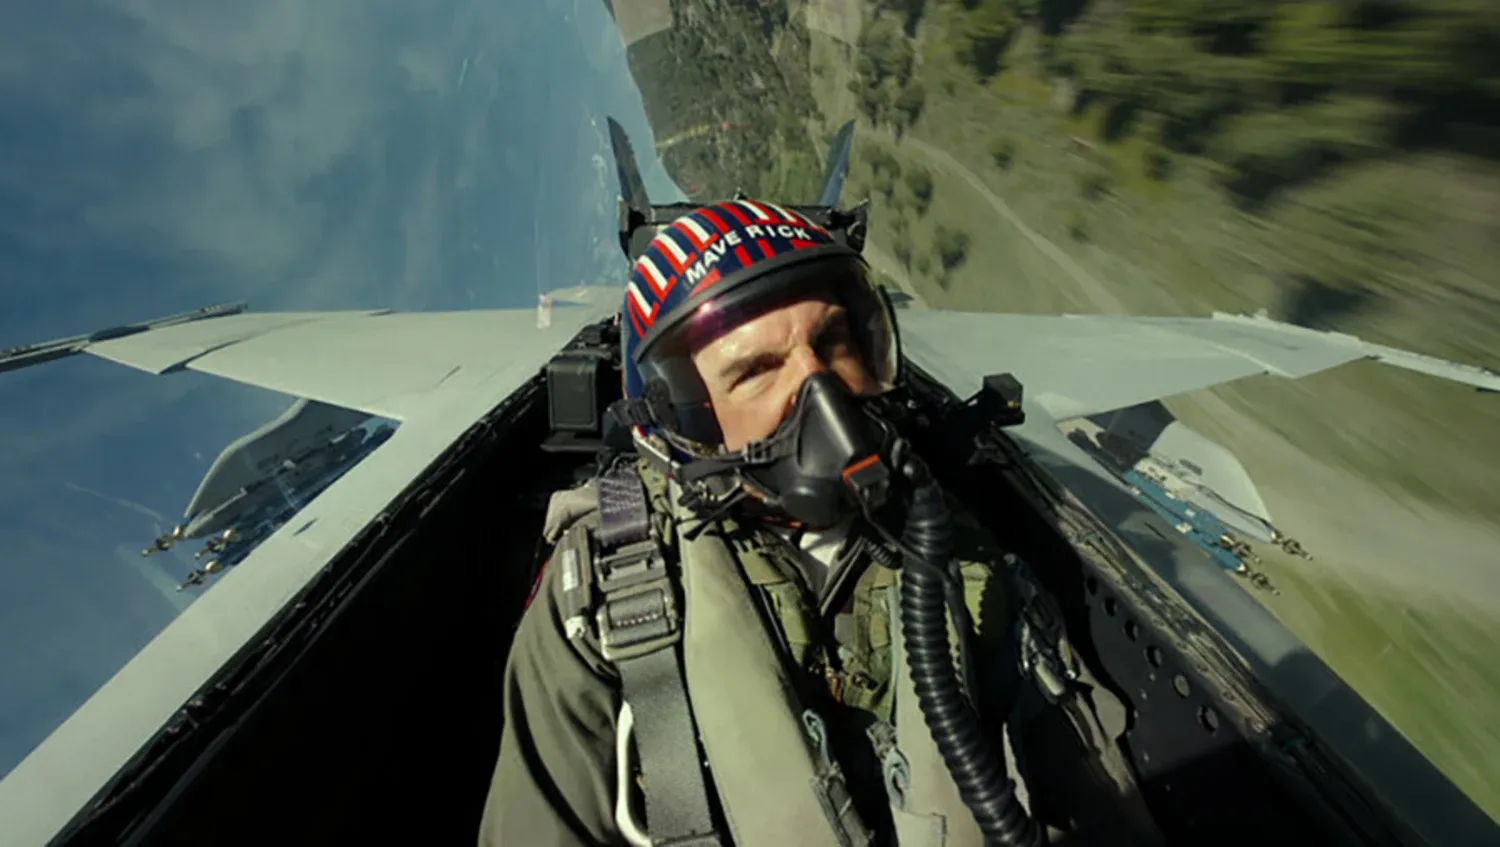 A different image of Tom Cruise in a fighter jet in TOP GUN: MAVERICK.